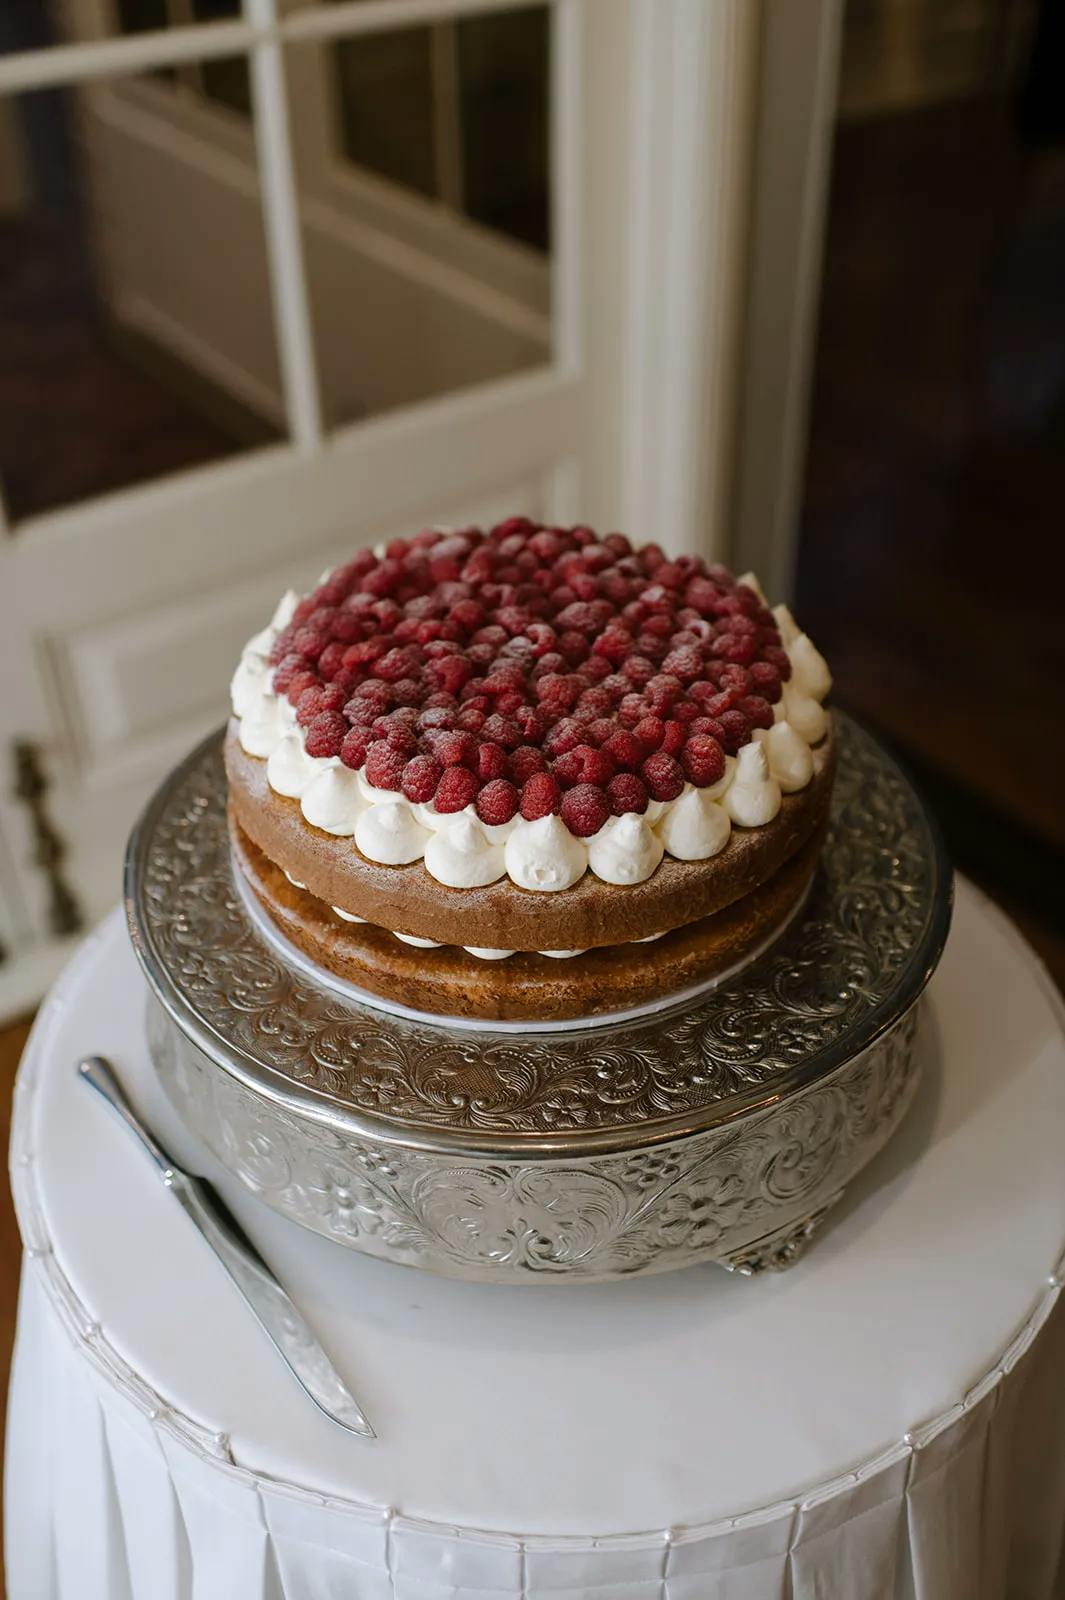 A round layer cake decorated with raspberries and cream sits on an ornate silver cake stand. There's a knife placed on a white tablecloth beside the cake. The background shows a wooden floor and a white door with glass panes.